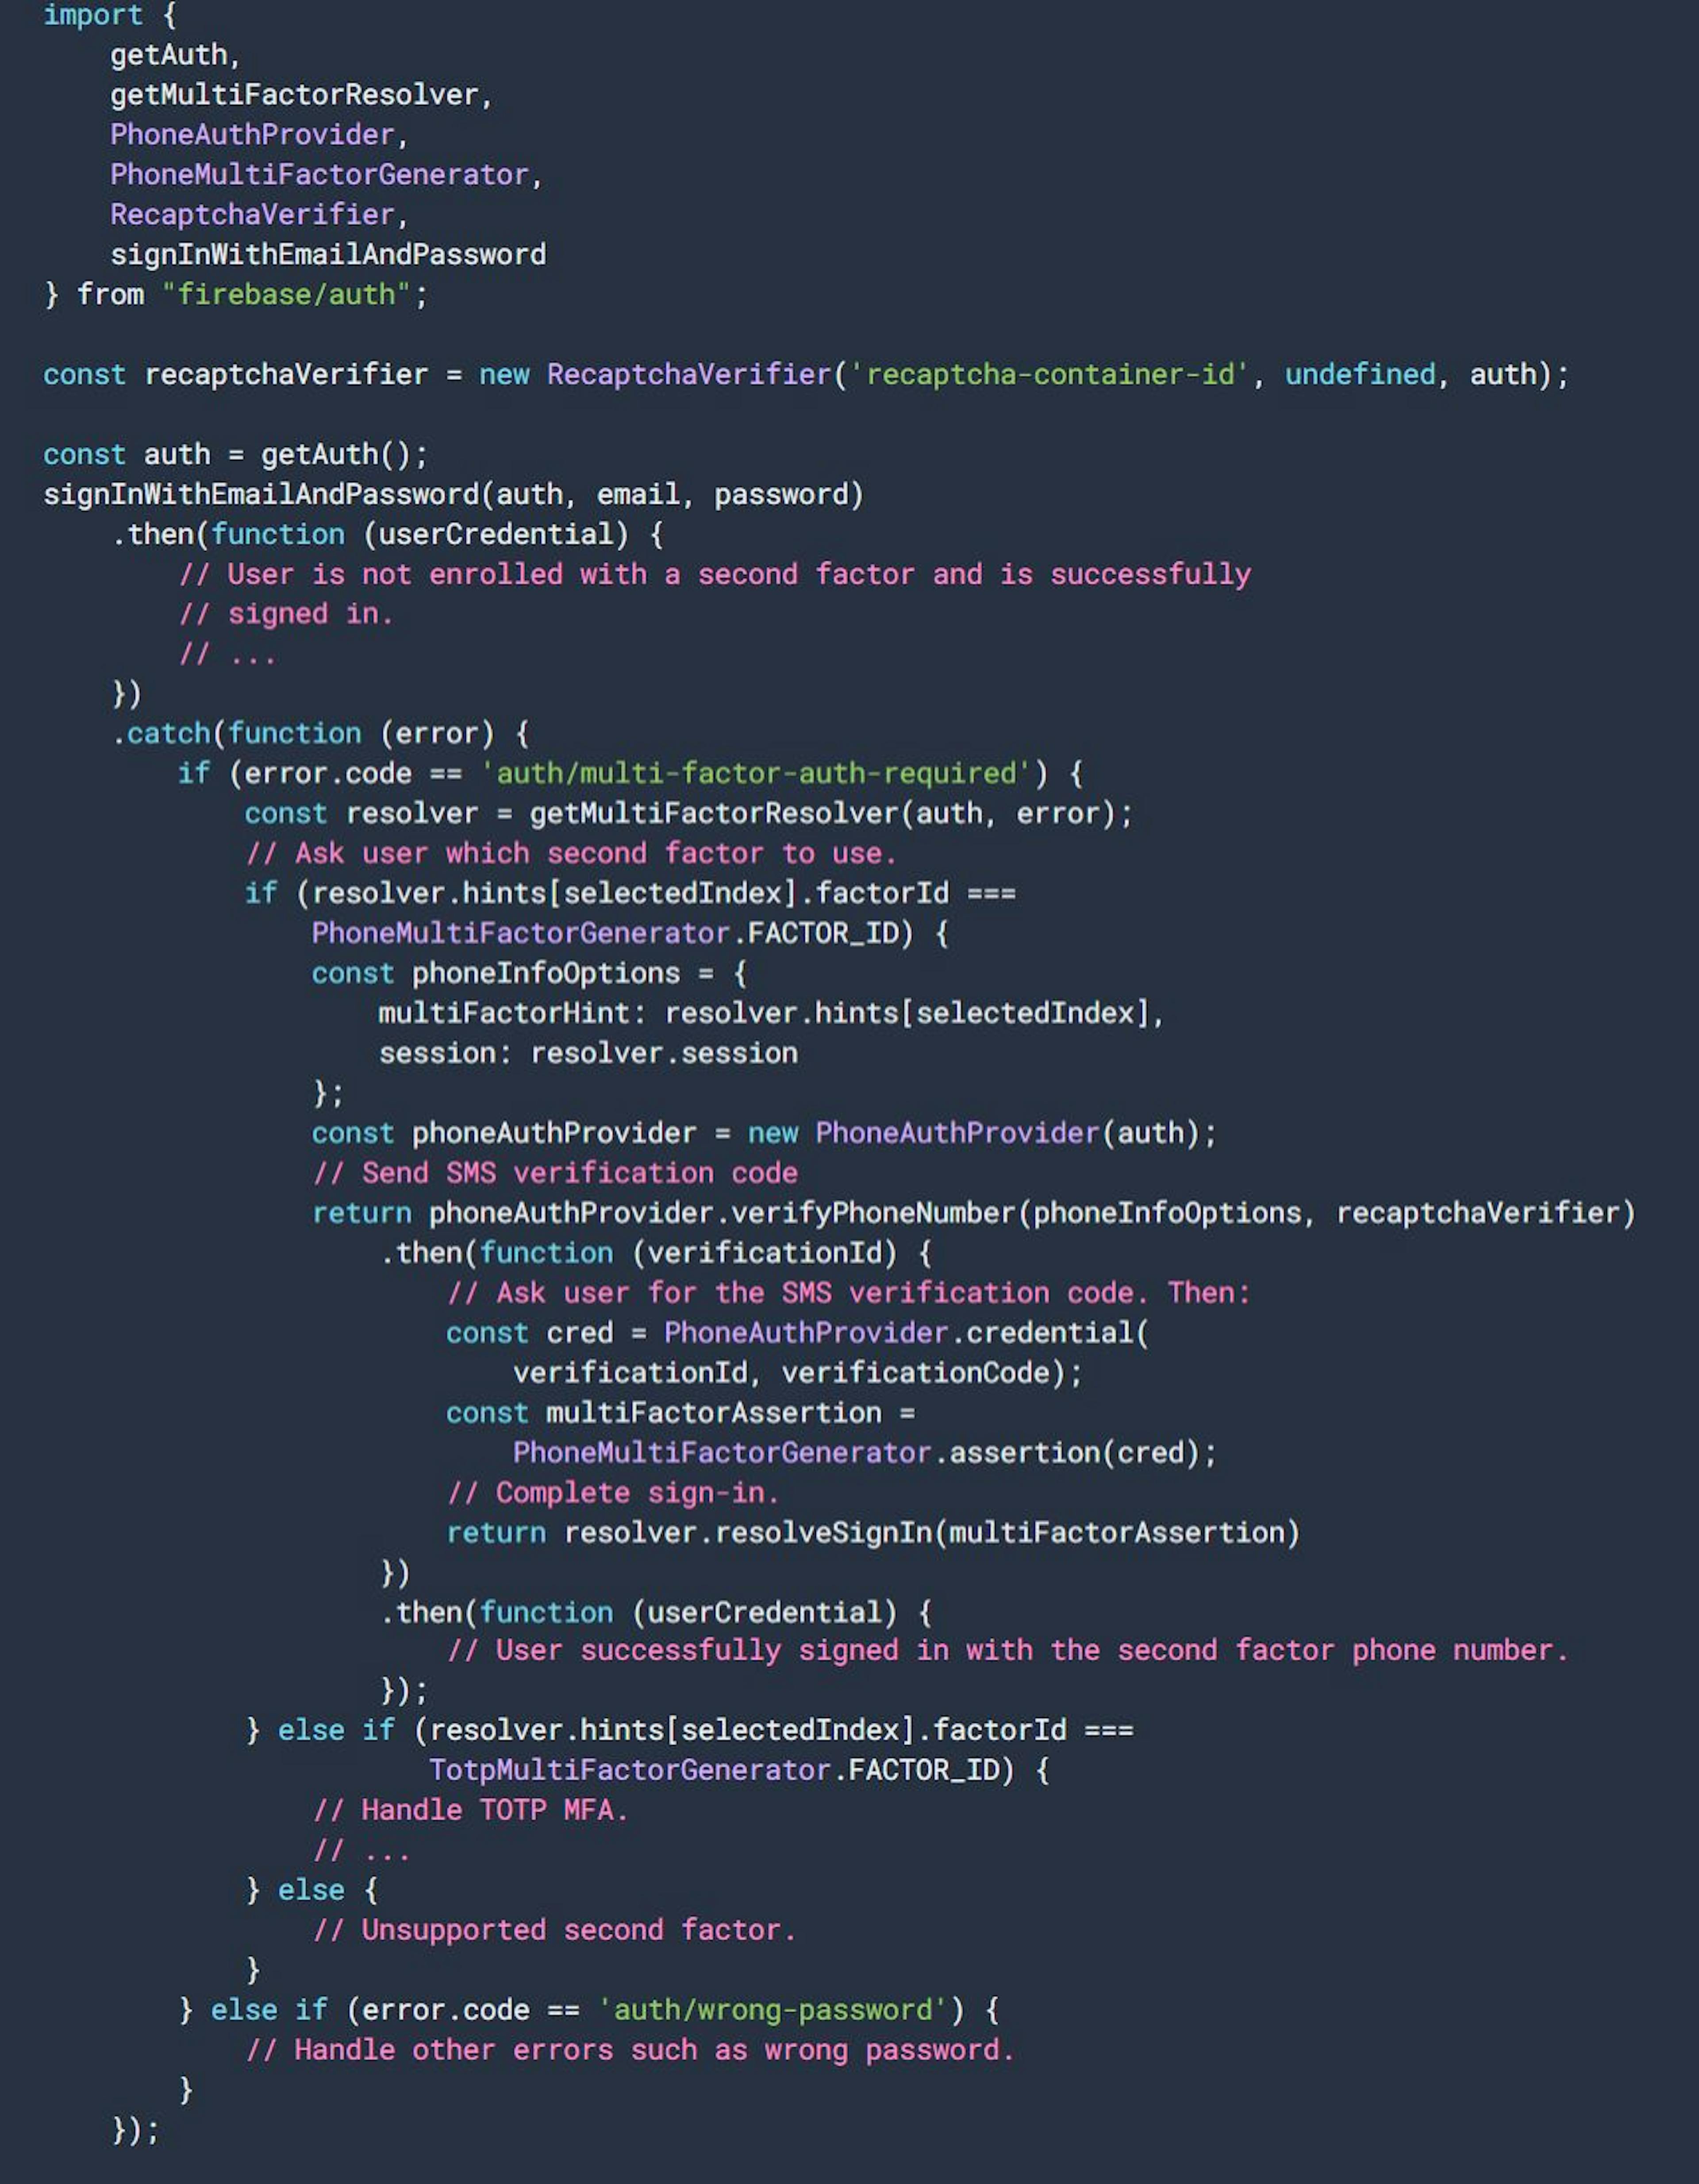 Code Source: Google Cloud,  JavaScript code using the Firebase Authentication library. This code snippet is used for handling multi-factor authentication (MFA) during the user sign-in process using Firebase Authentication.